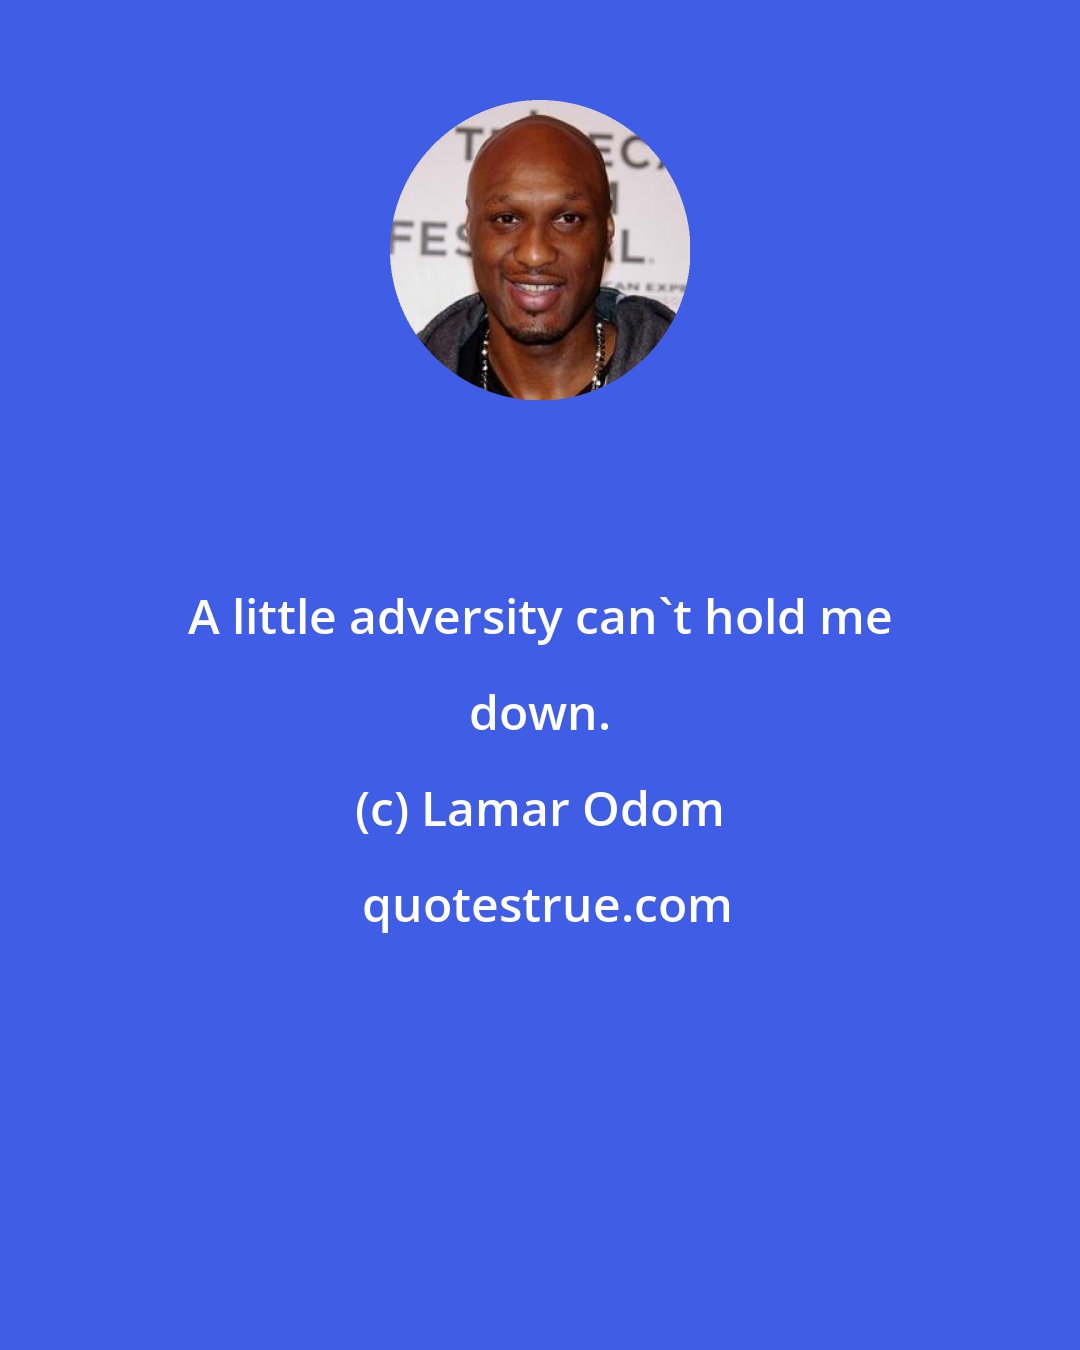 Lamar Odom: A little adversity can't hold me down.